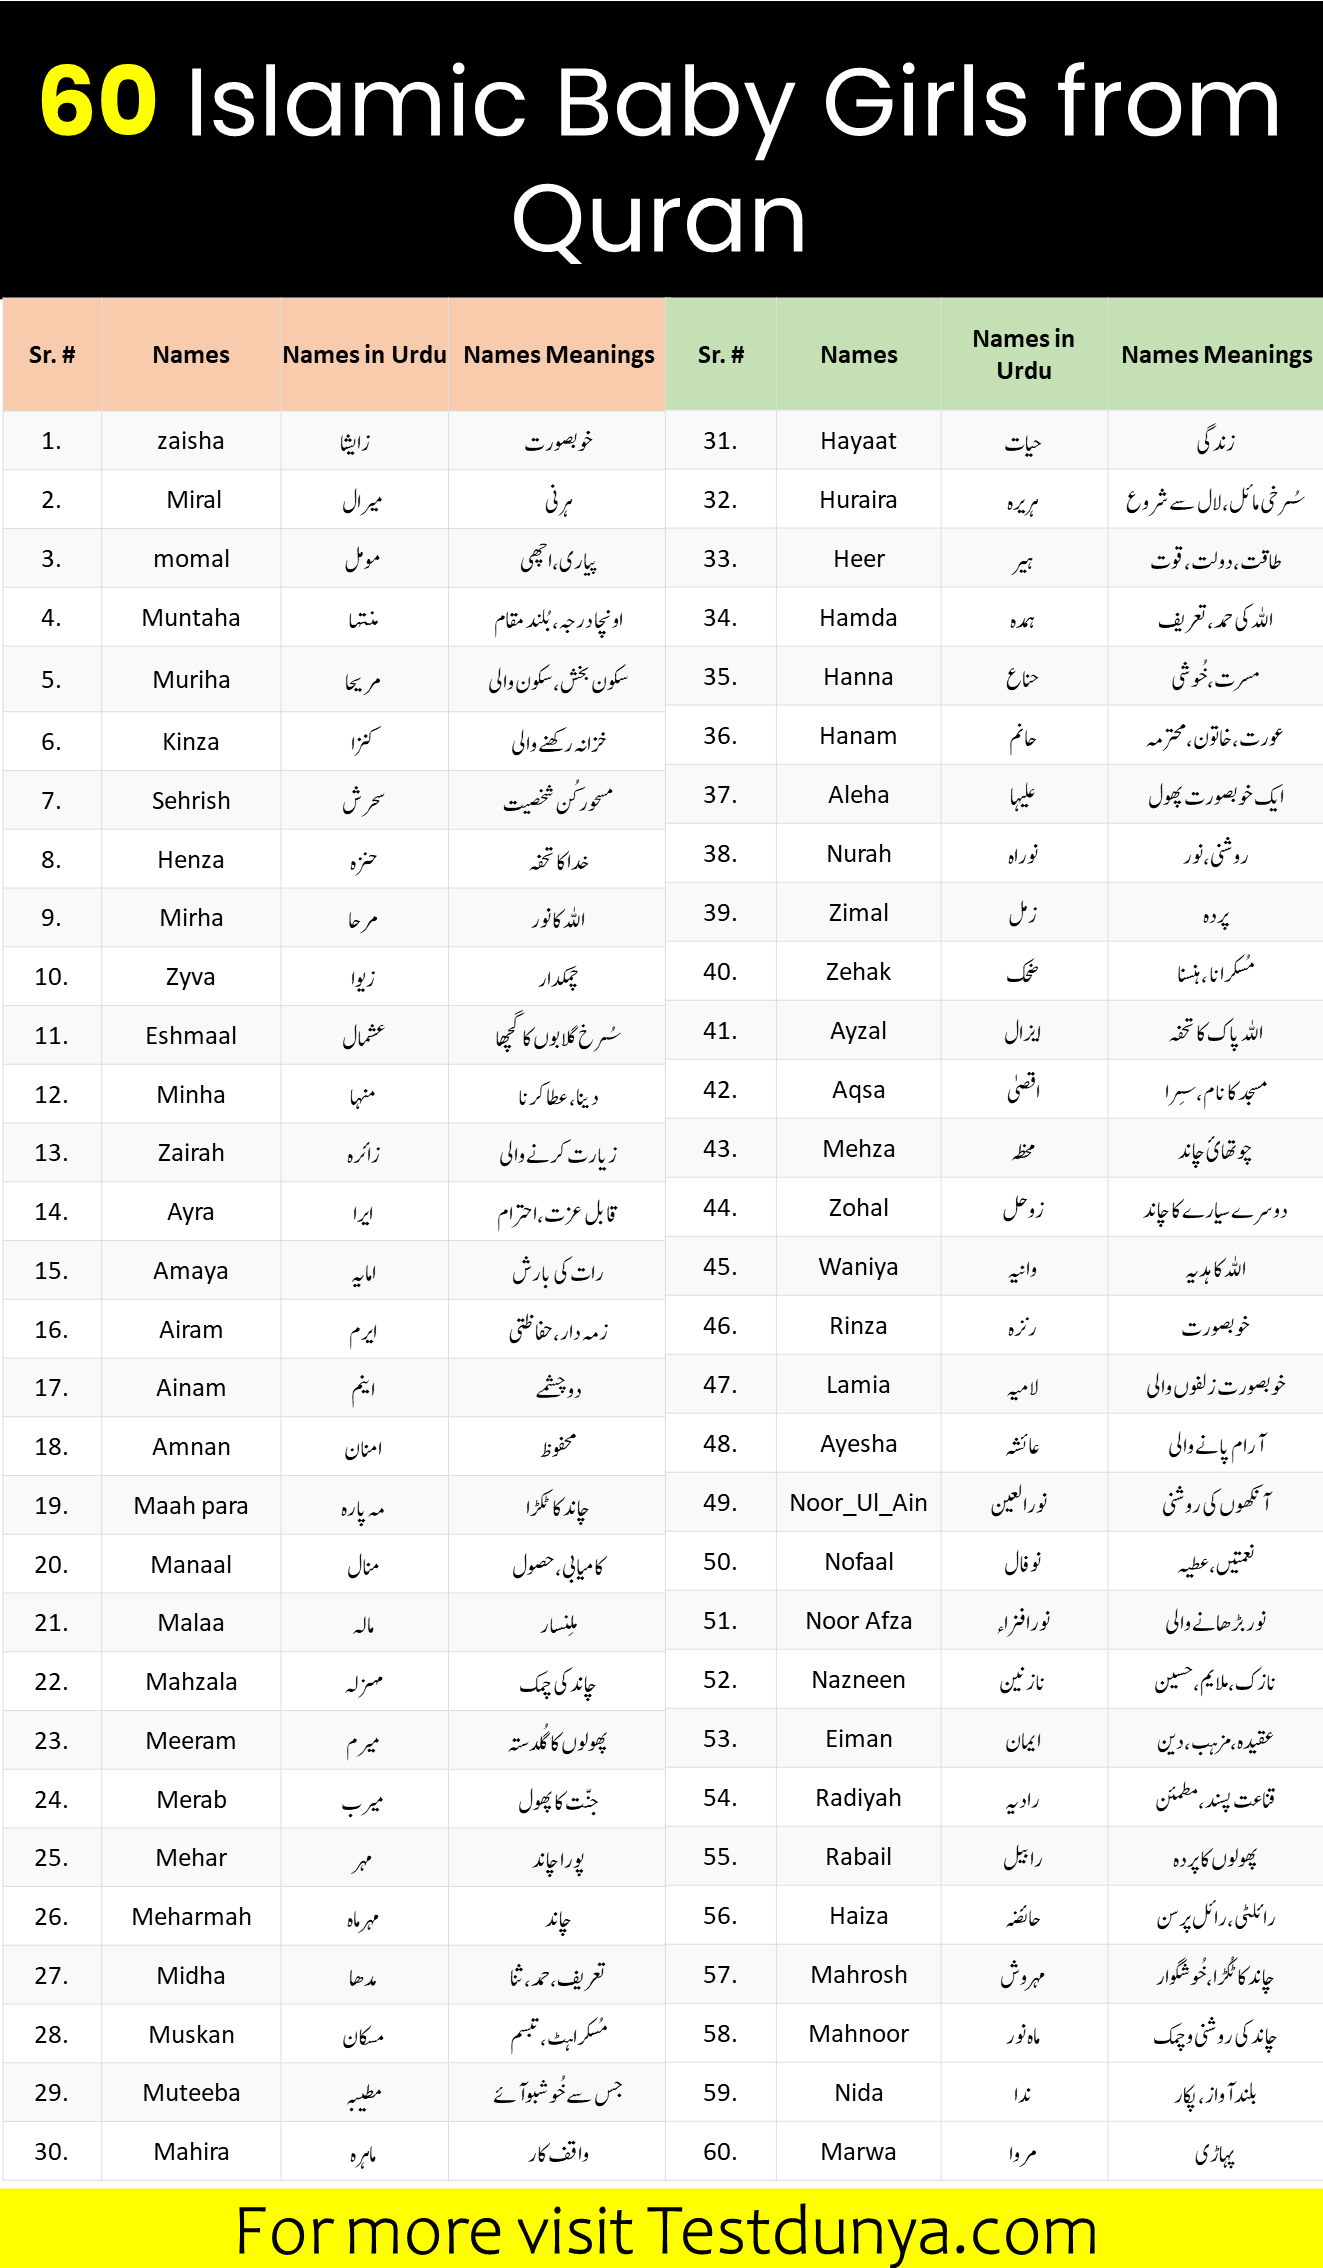 Islamic Baby Girls Names and Meanings in Urdu from Quran